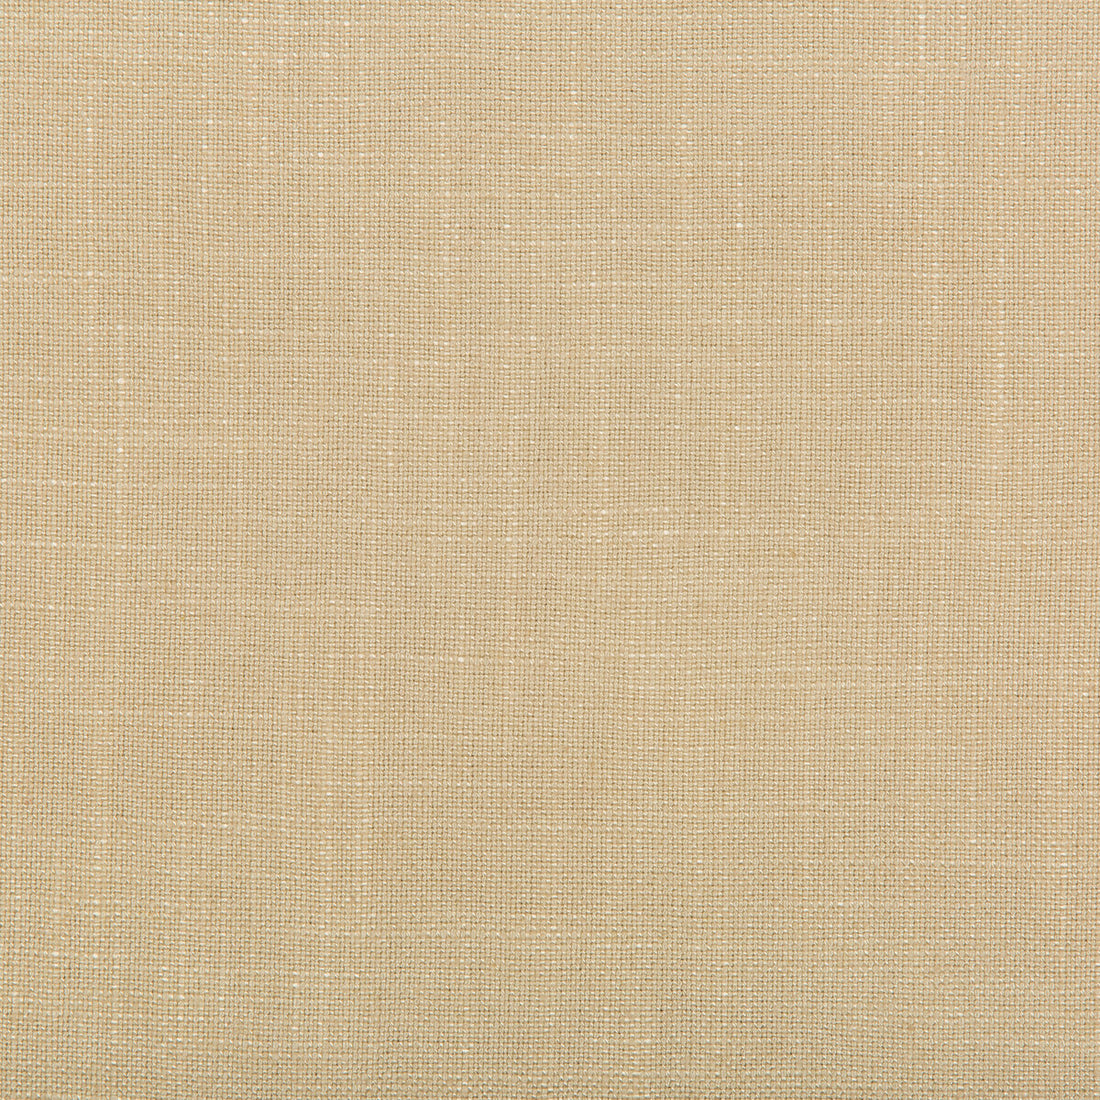 Aura fabric in shell color - pattern 35520.1611.0 - by Kravet Design